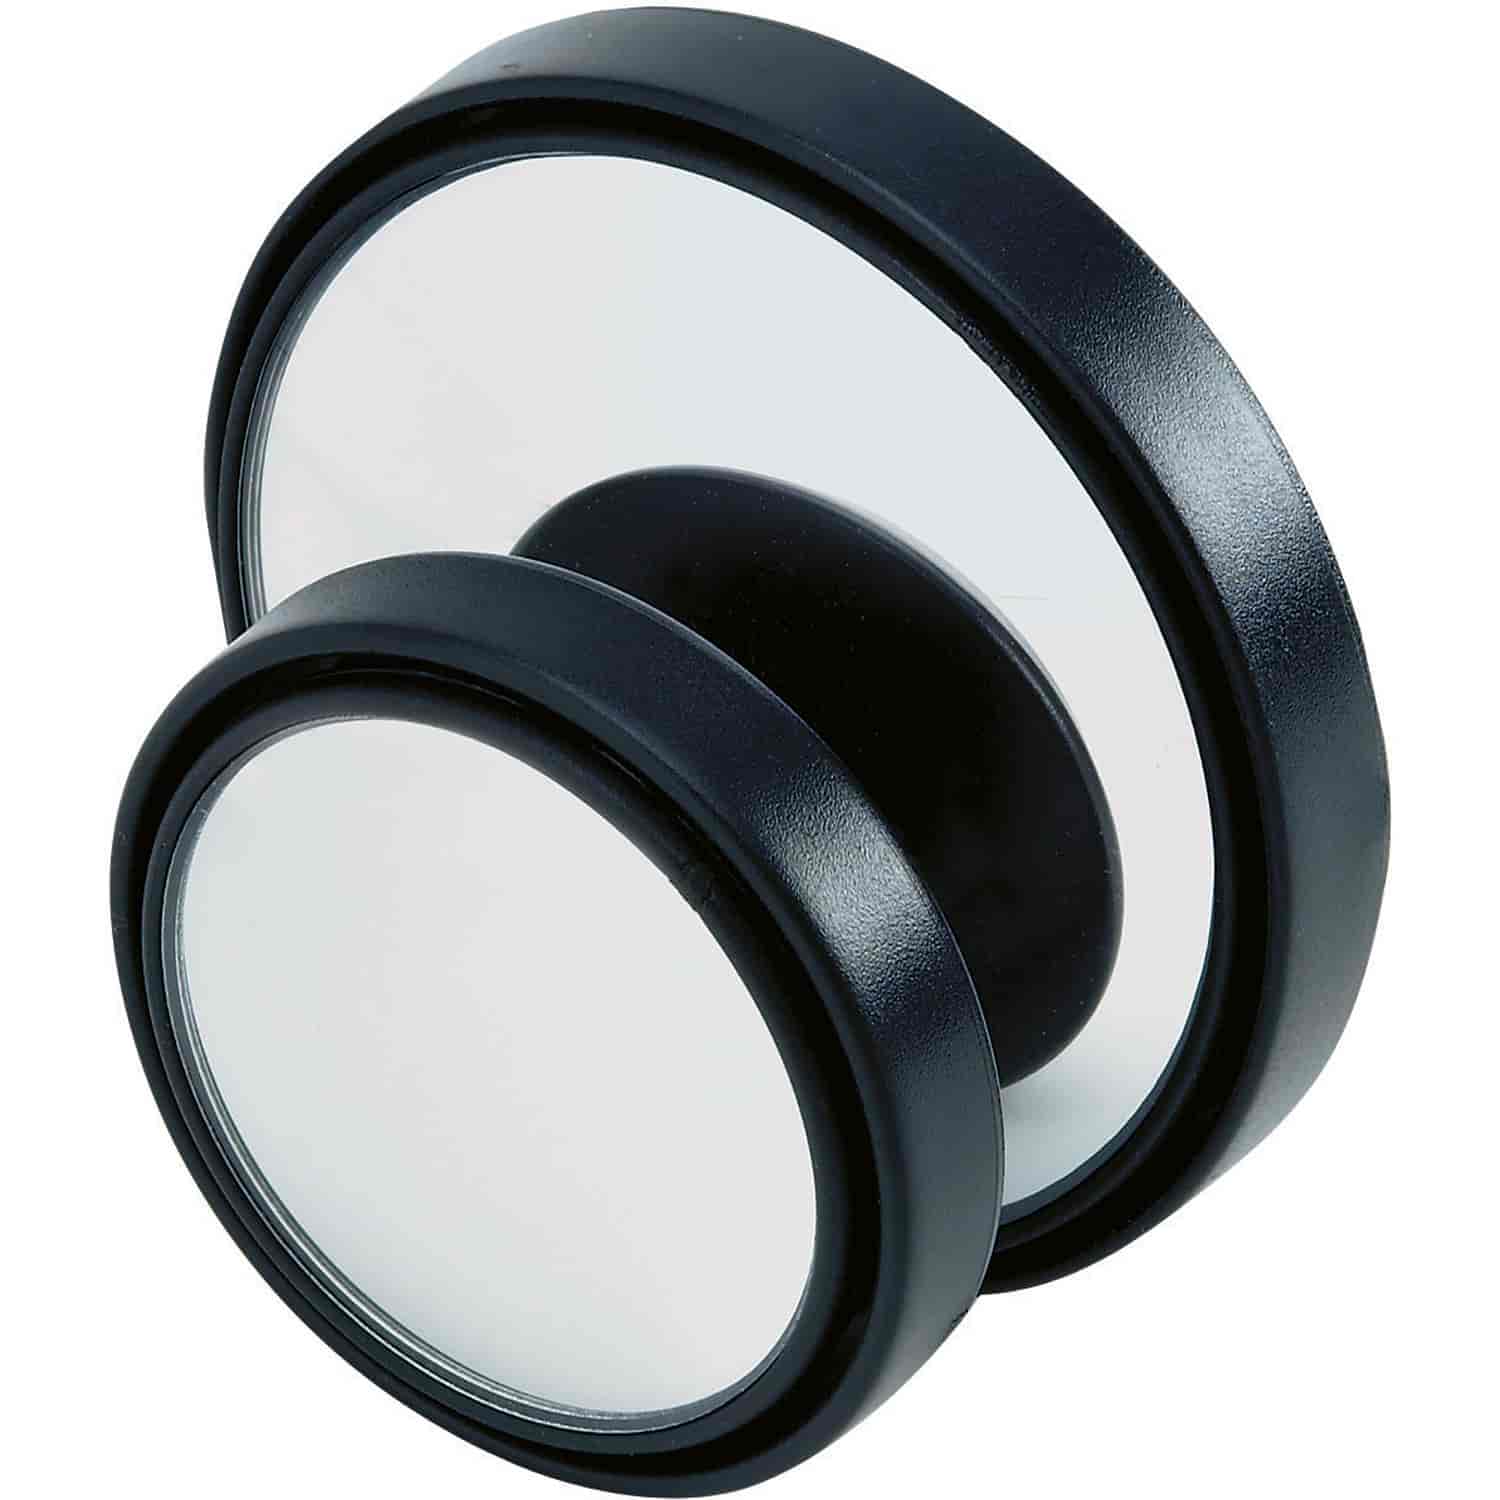 Stick-On Round Mirror This mirror is 2 inches in diameter.